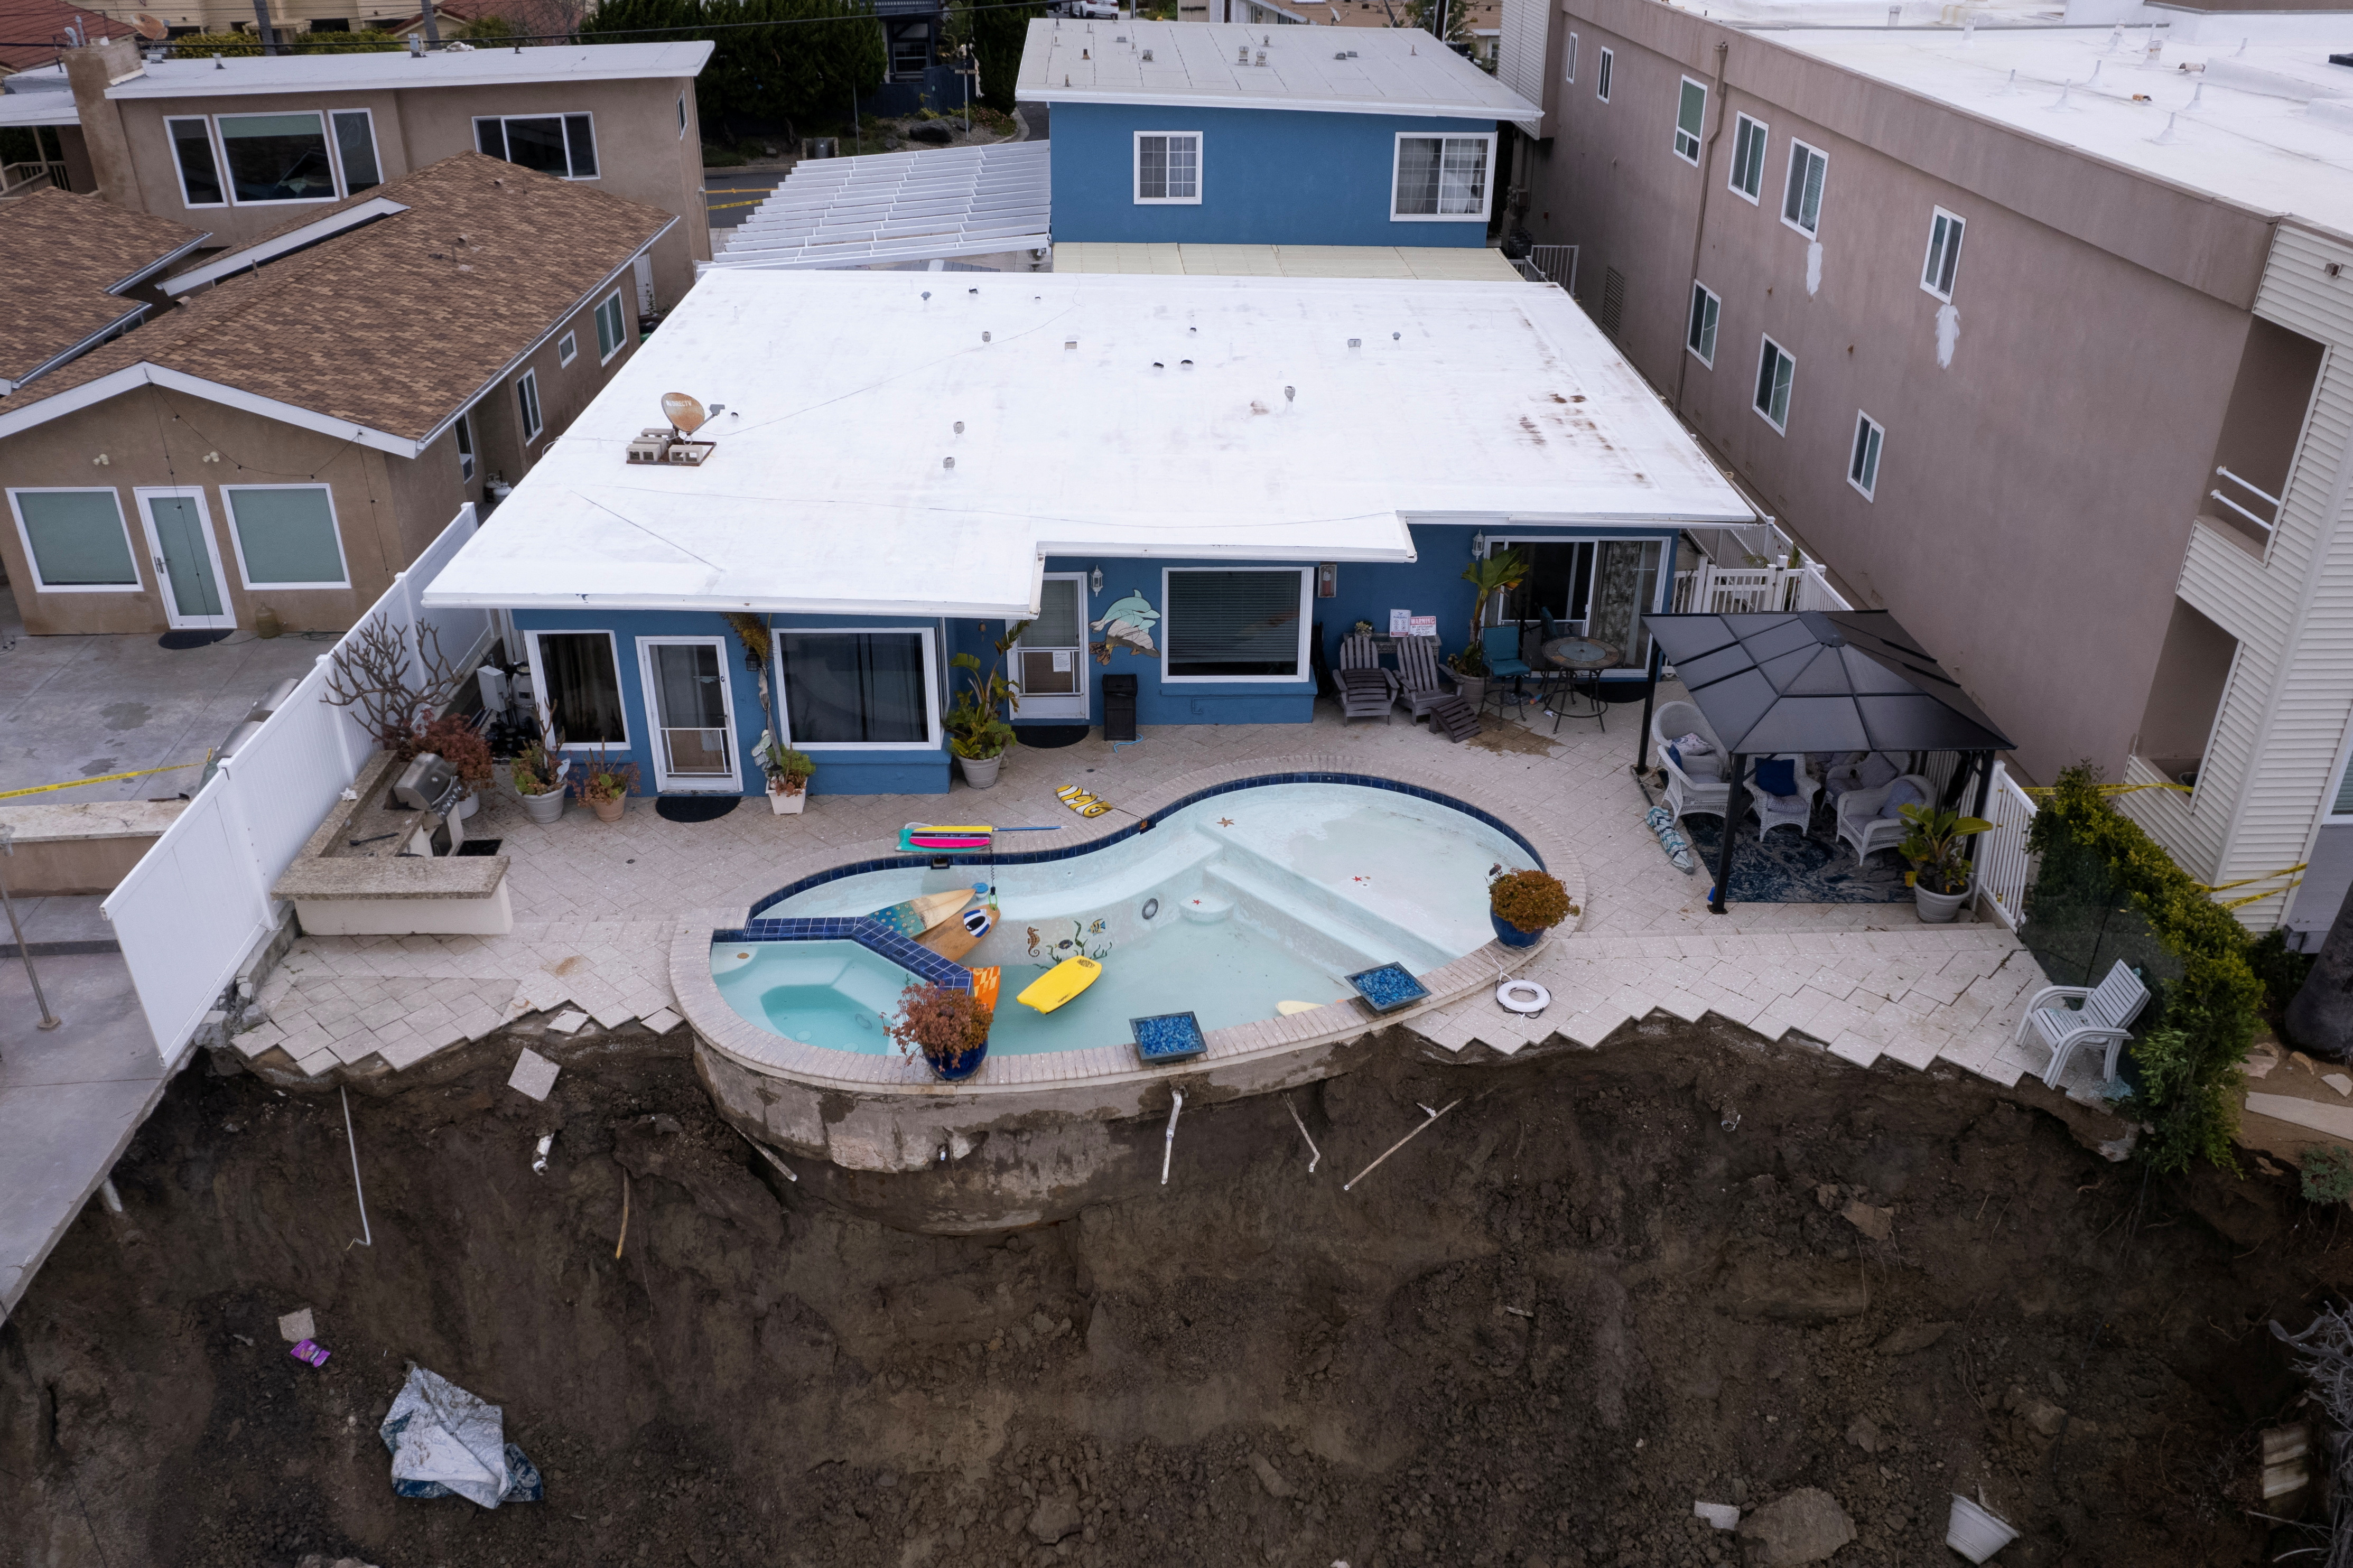 A backyard pool hangs on cliffside after torrential rains hits California beachtown